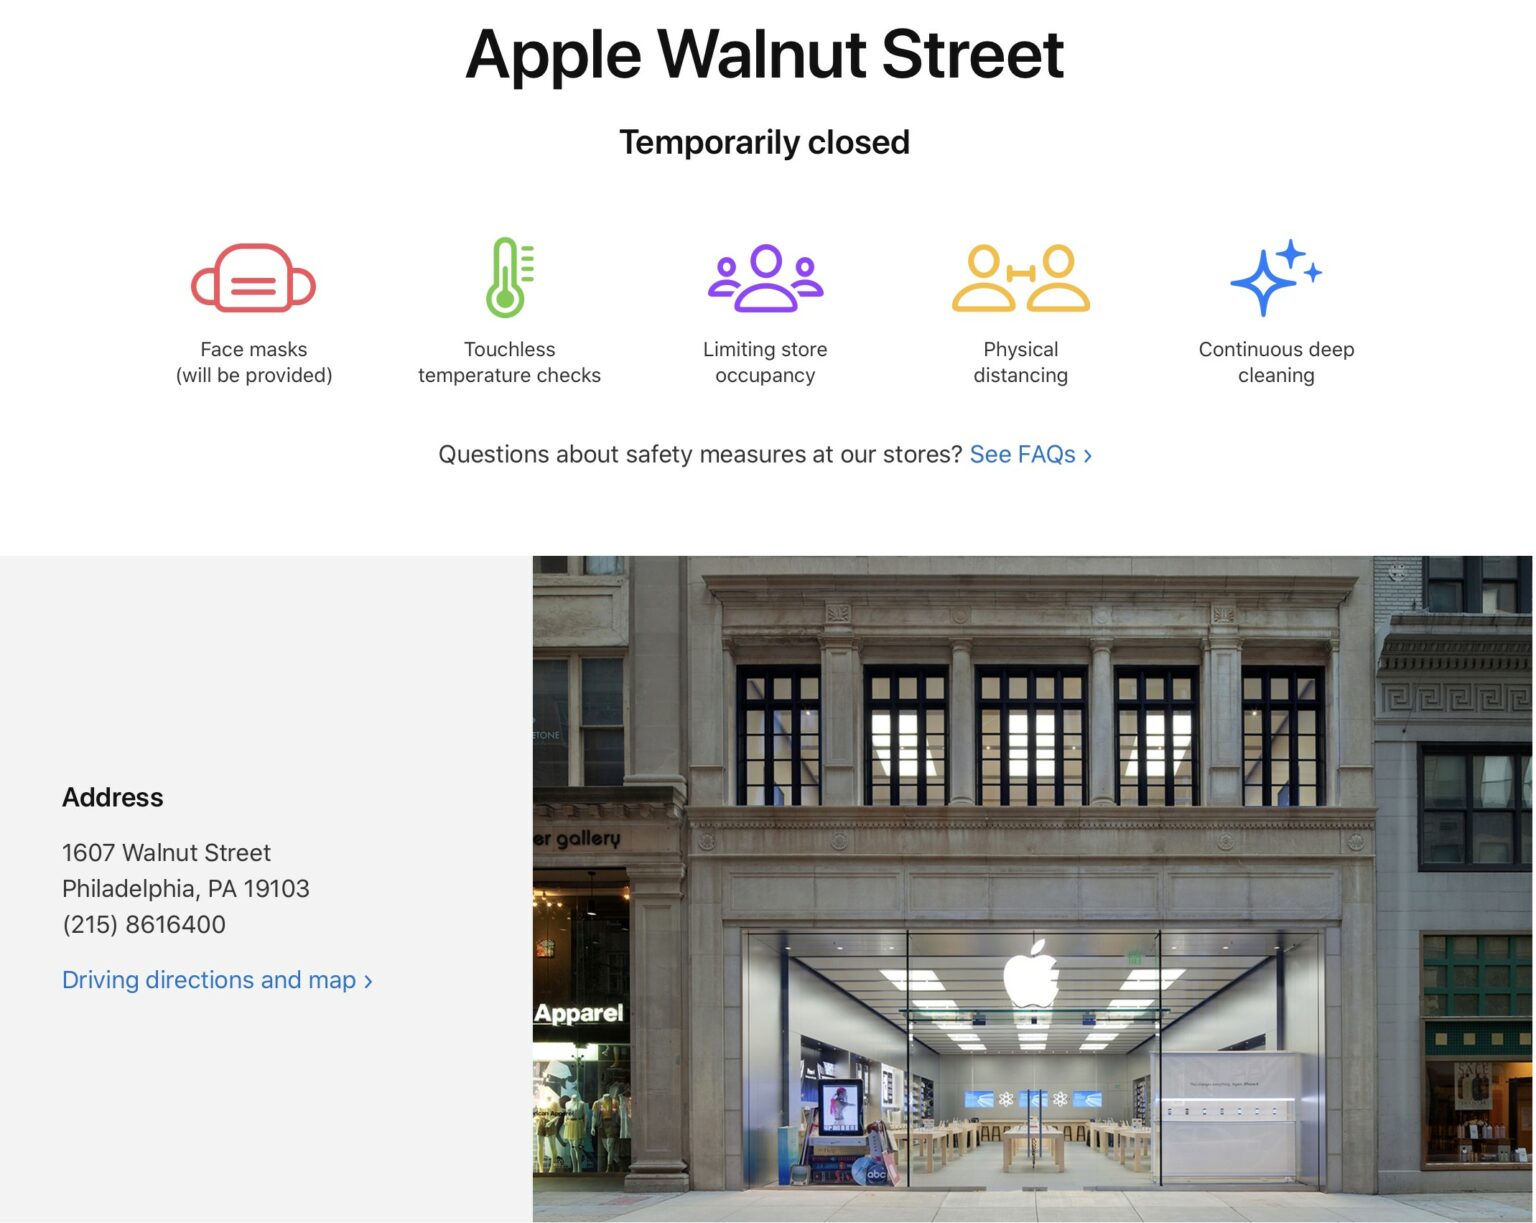 Apple Store temporarily closed.